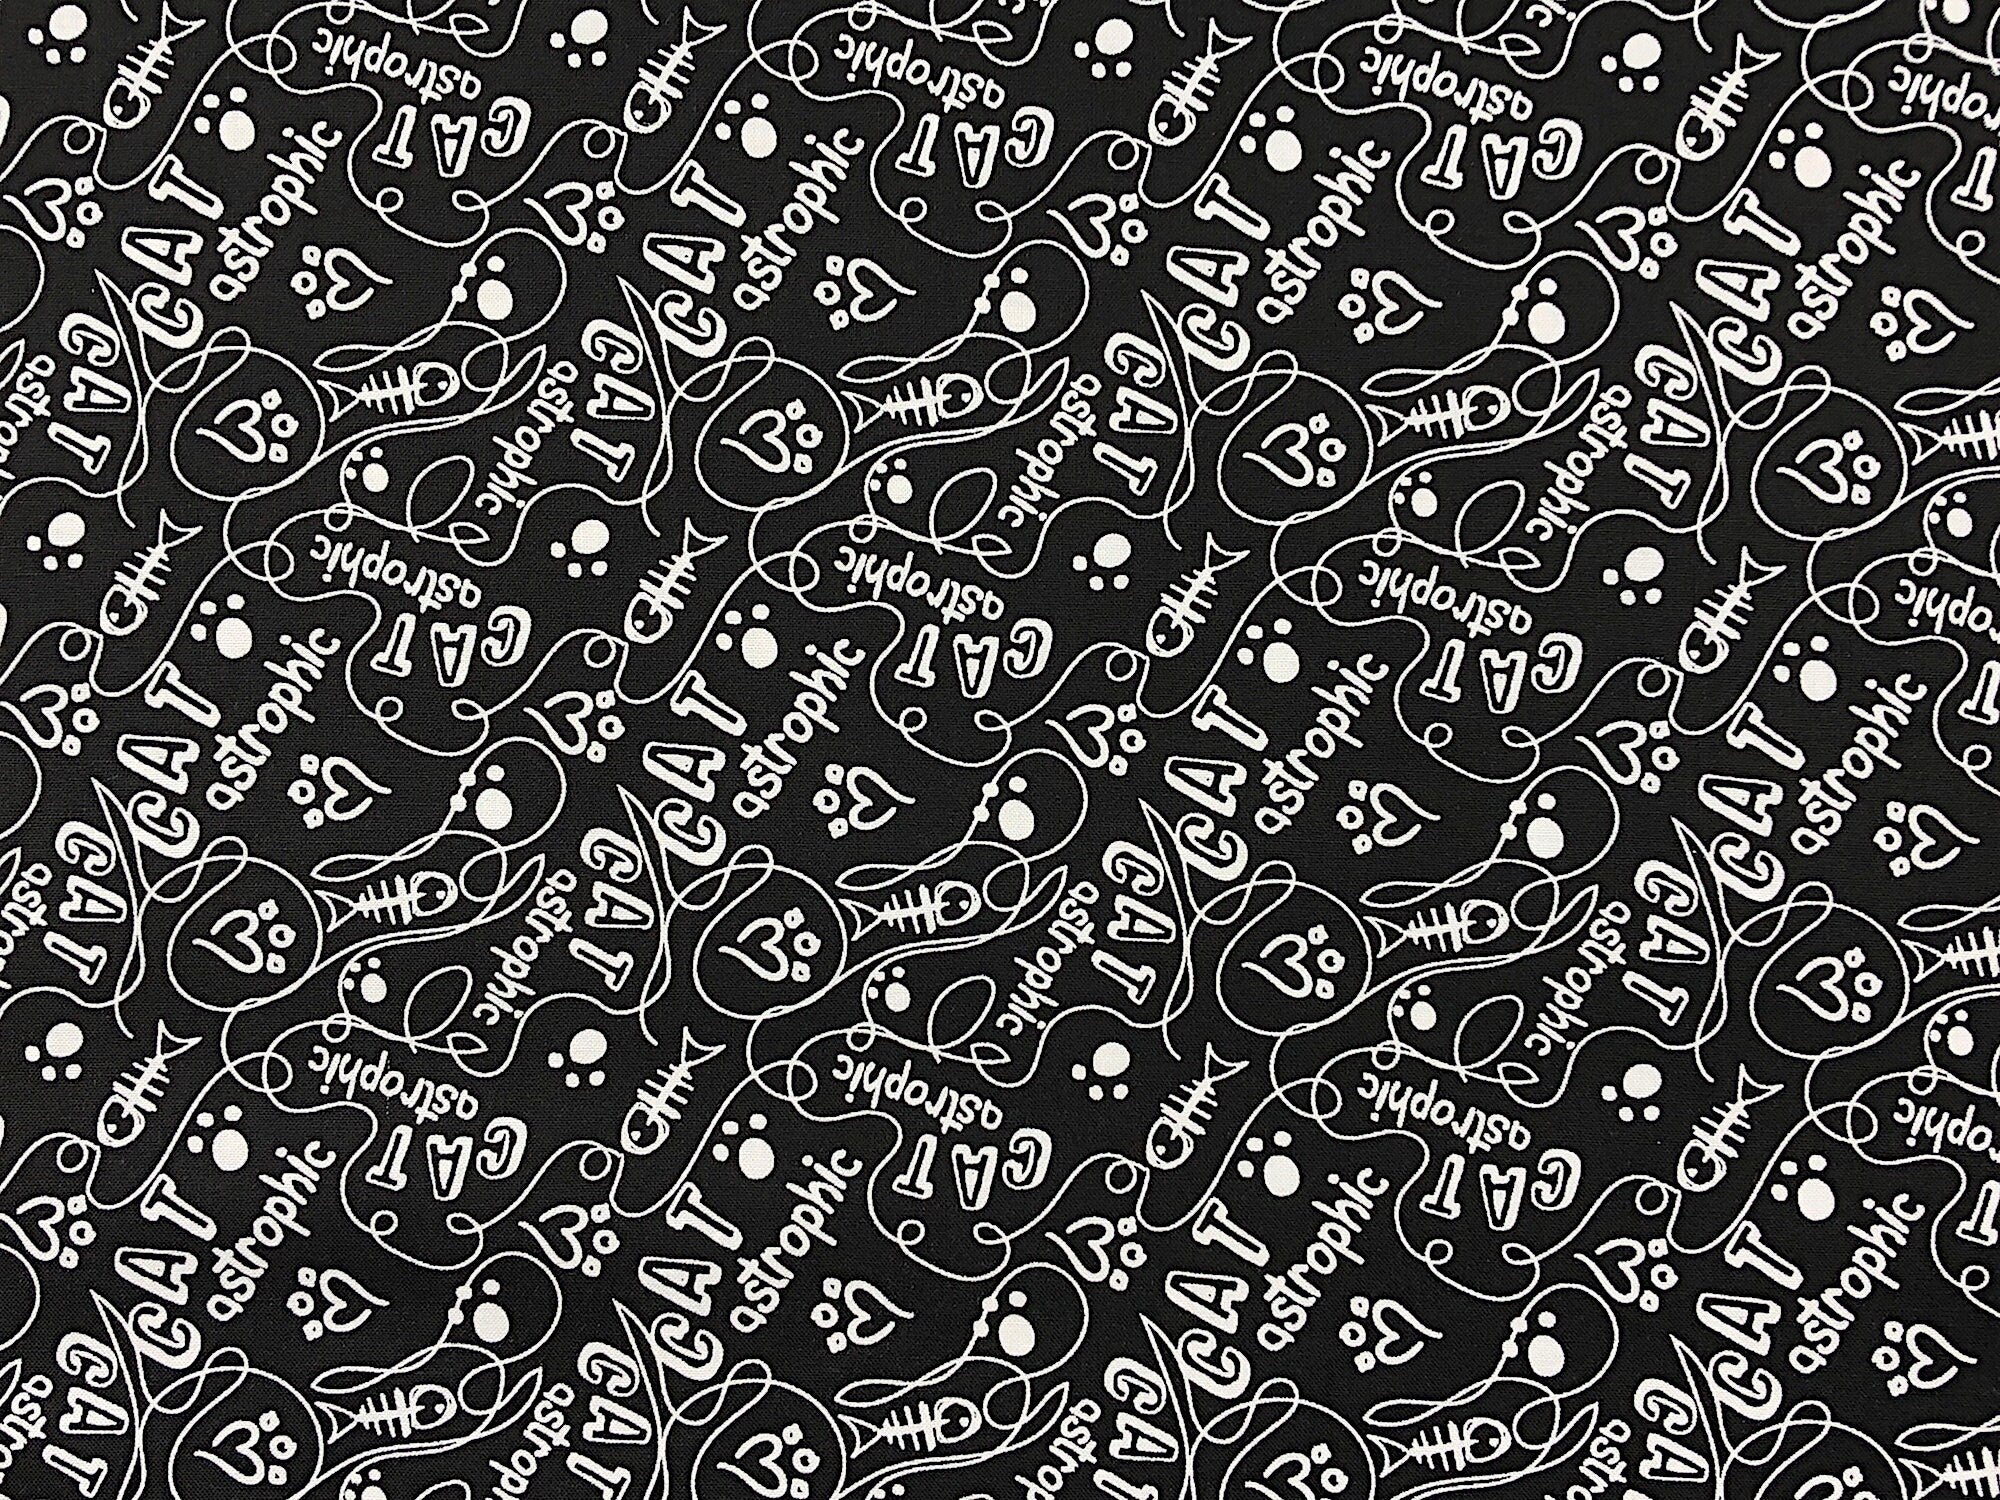 This Black fabric is called Cats Rule - Catastrophic. White words fish bones and heart prints are tossed all over this fabric.